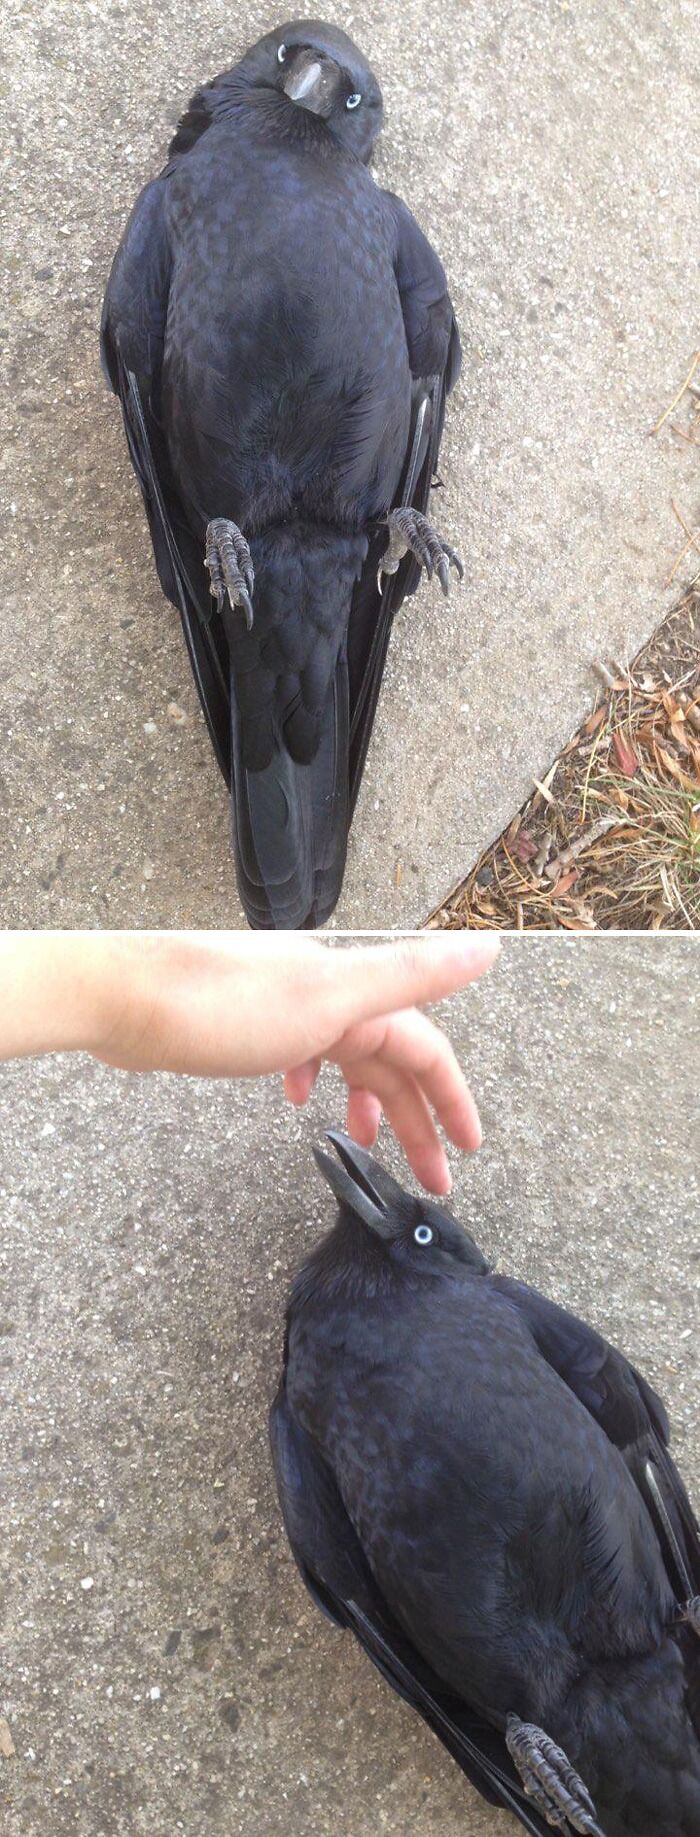 Crow lying on their back and person pet